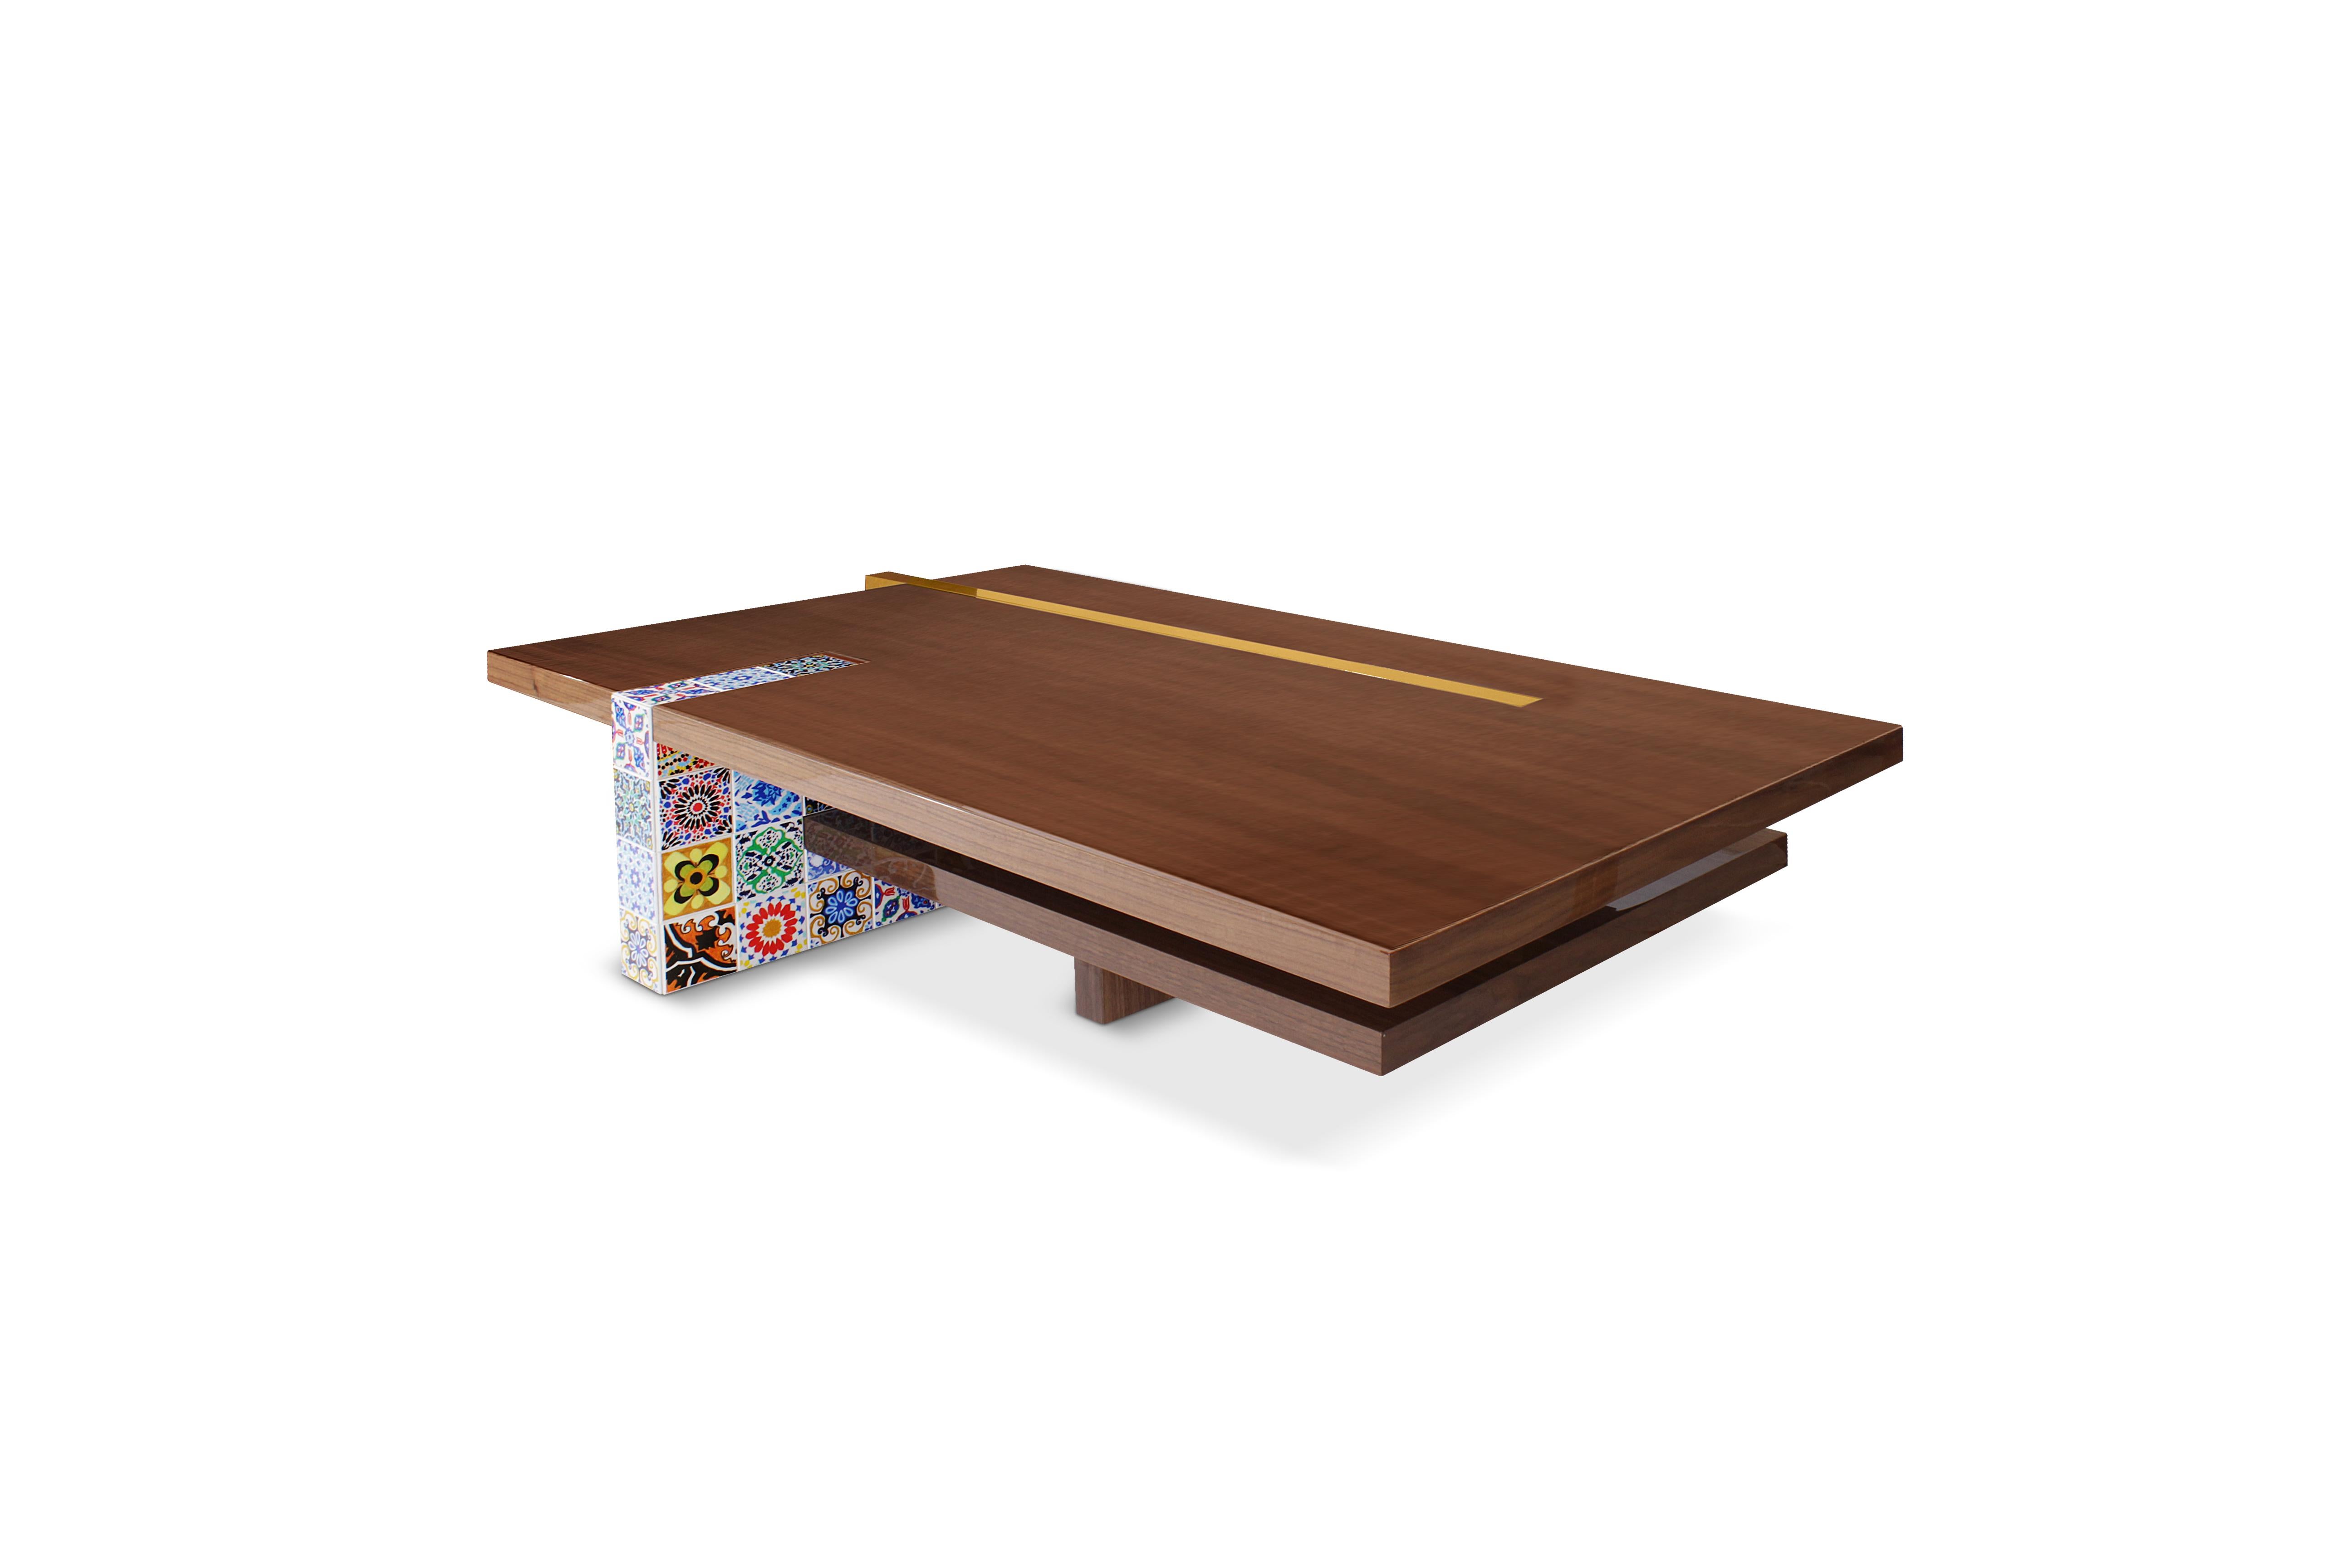 Portuguese 21st Century Camelia Center Table Walnut Wood Layers Hand Painted Tiles For Sale